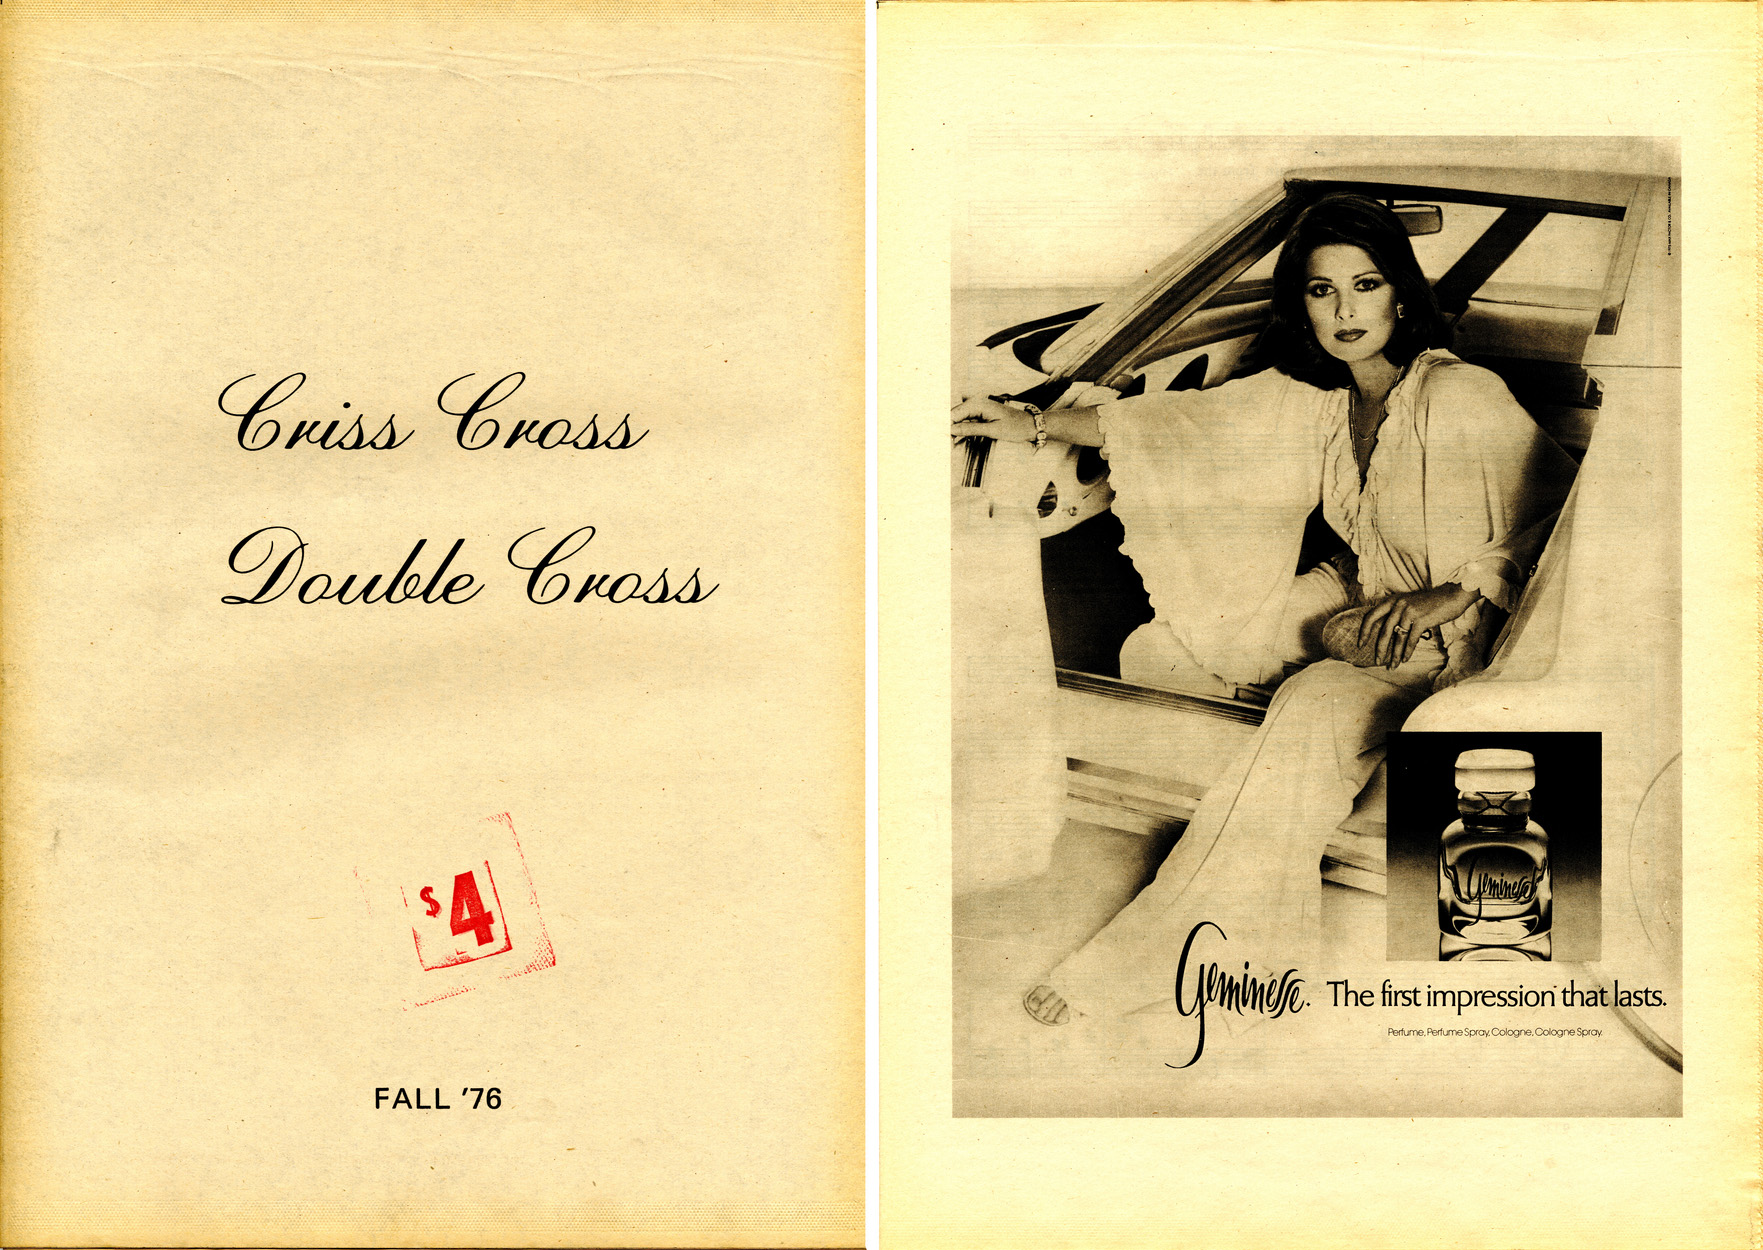 <em>Criss Cross Double Cross</em>, Issue 1 (Fall 1976). To download a PDF excerpt, <a href="http://s3.amazonaws.com/eob_texts-production/texts/112/1340667135_CCDC_PDF_SAMPLE_NEW.pdf?1340667135" target="_blank">click here</a>.